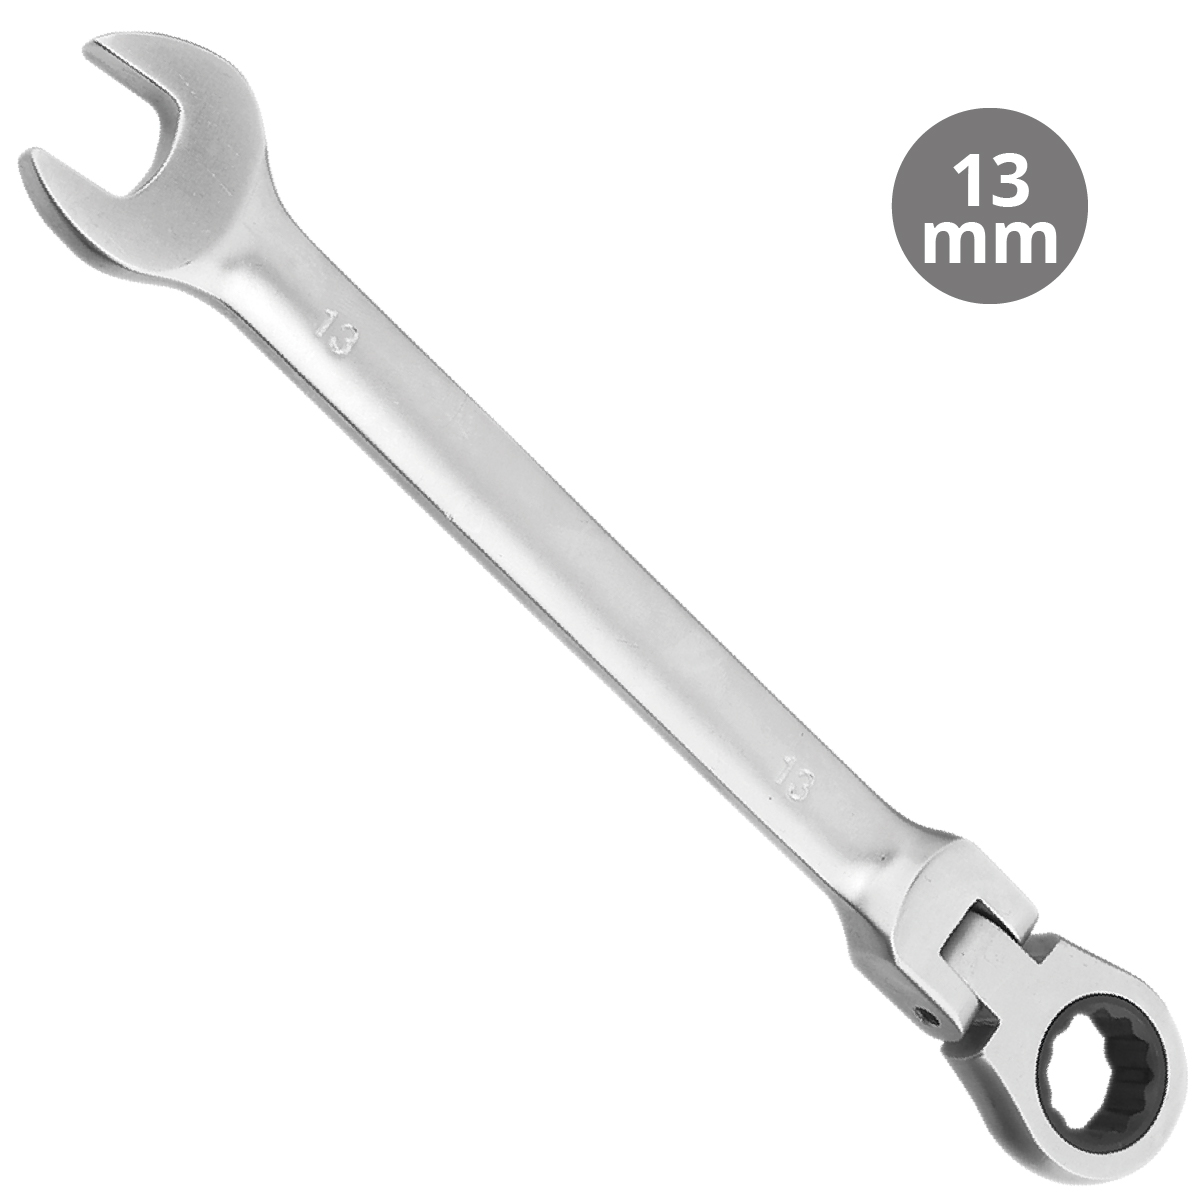 Combination rachet wrenches CR-V 13mm